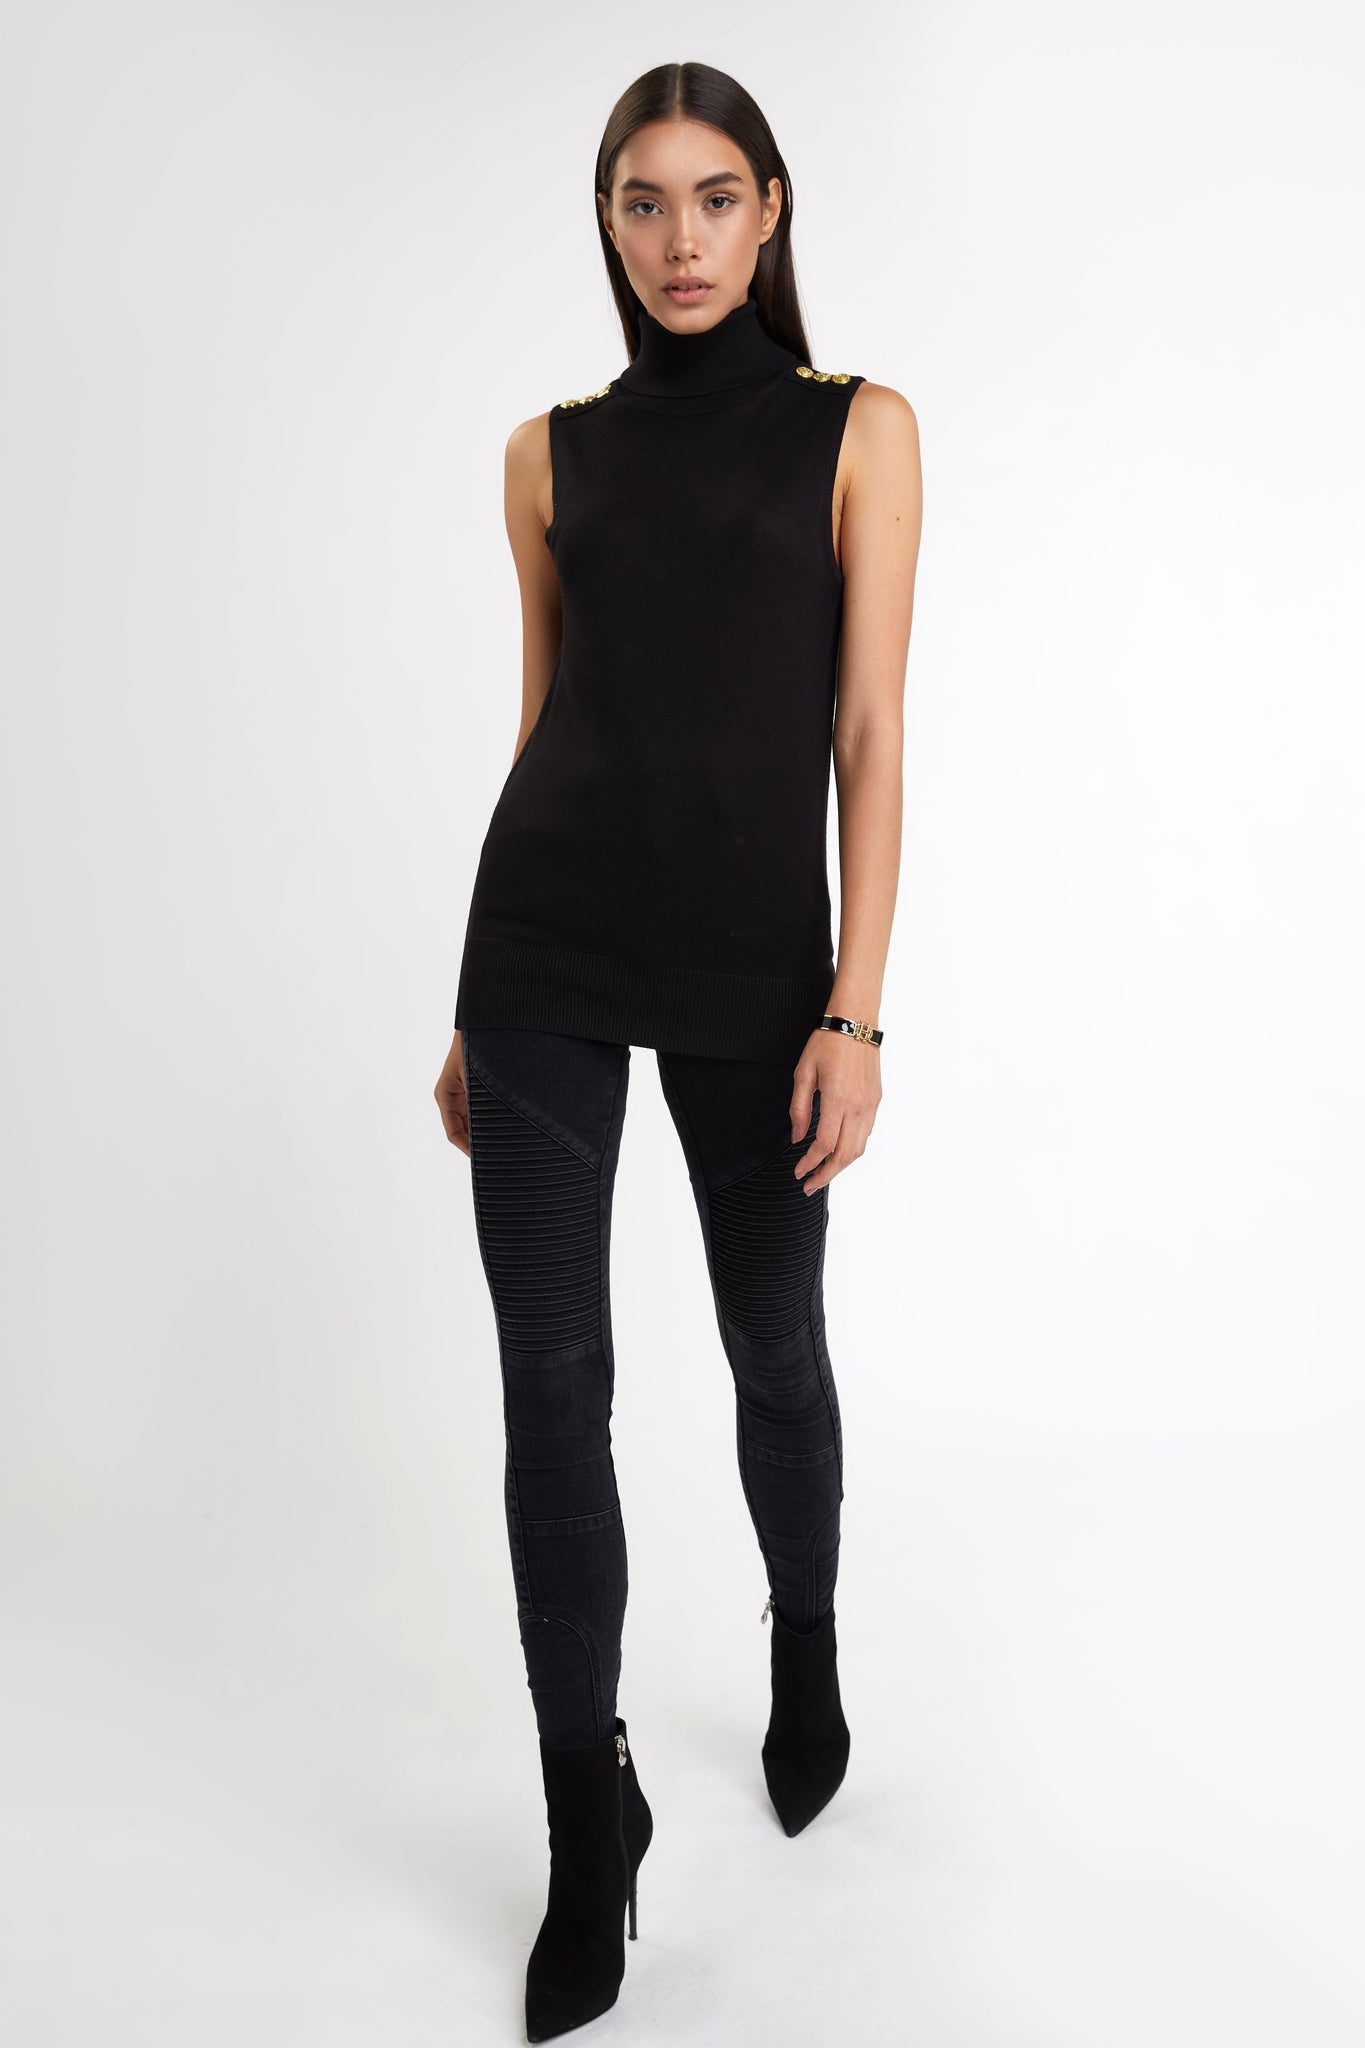 fitted lightweight sleeveless rollneck knit in black with gold button detail across shoulders